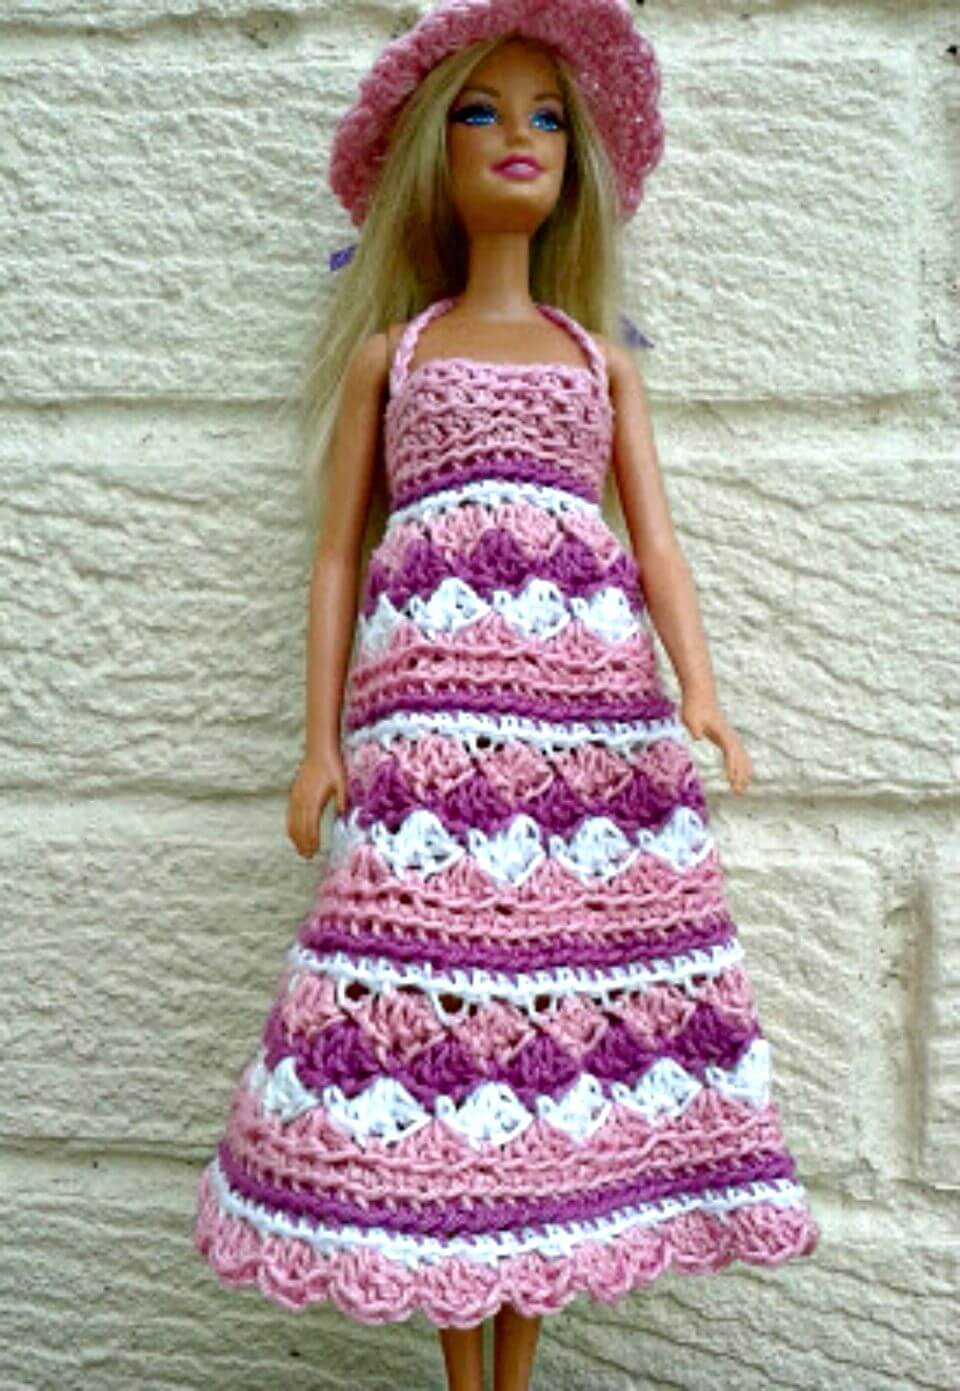 Crochet Doll Clothes Patterns 20 Free Crochet Barbie Clothes Pattern Diy Crafts